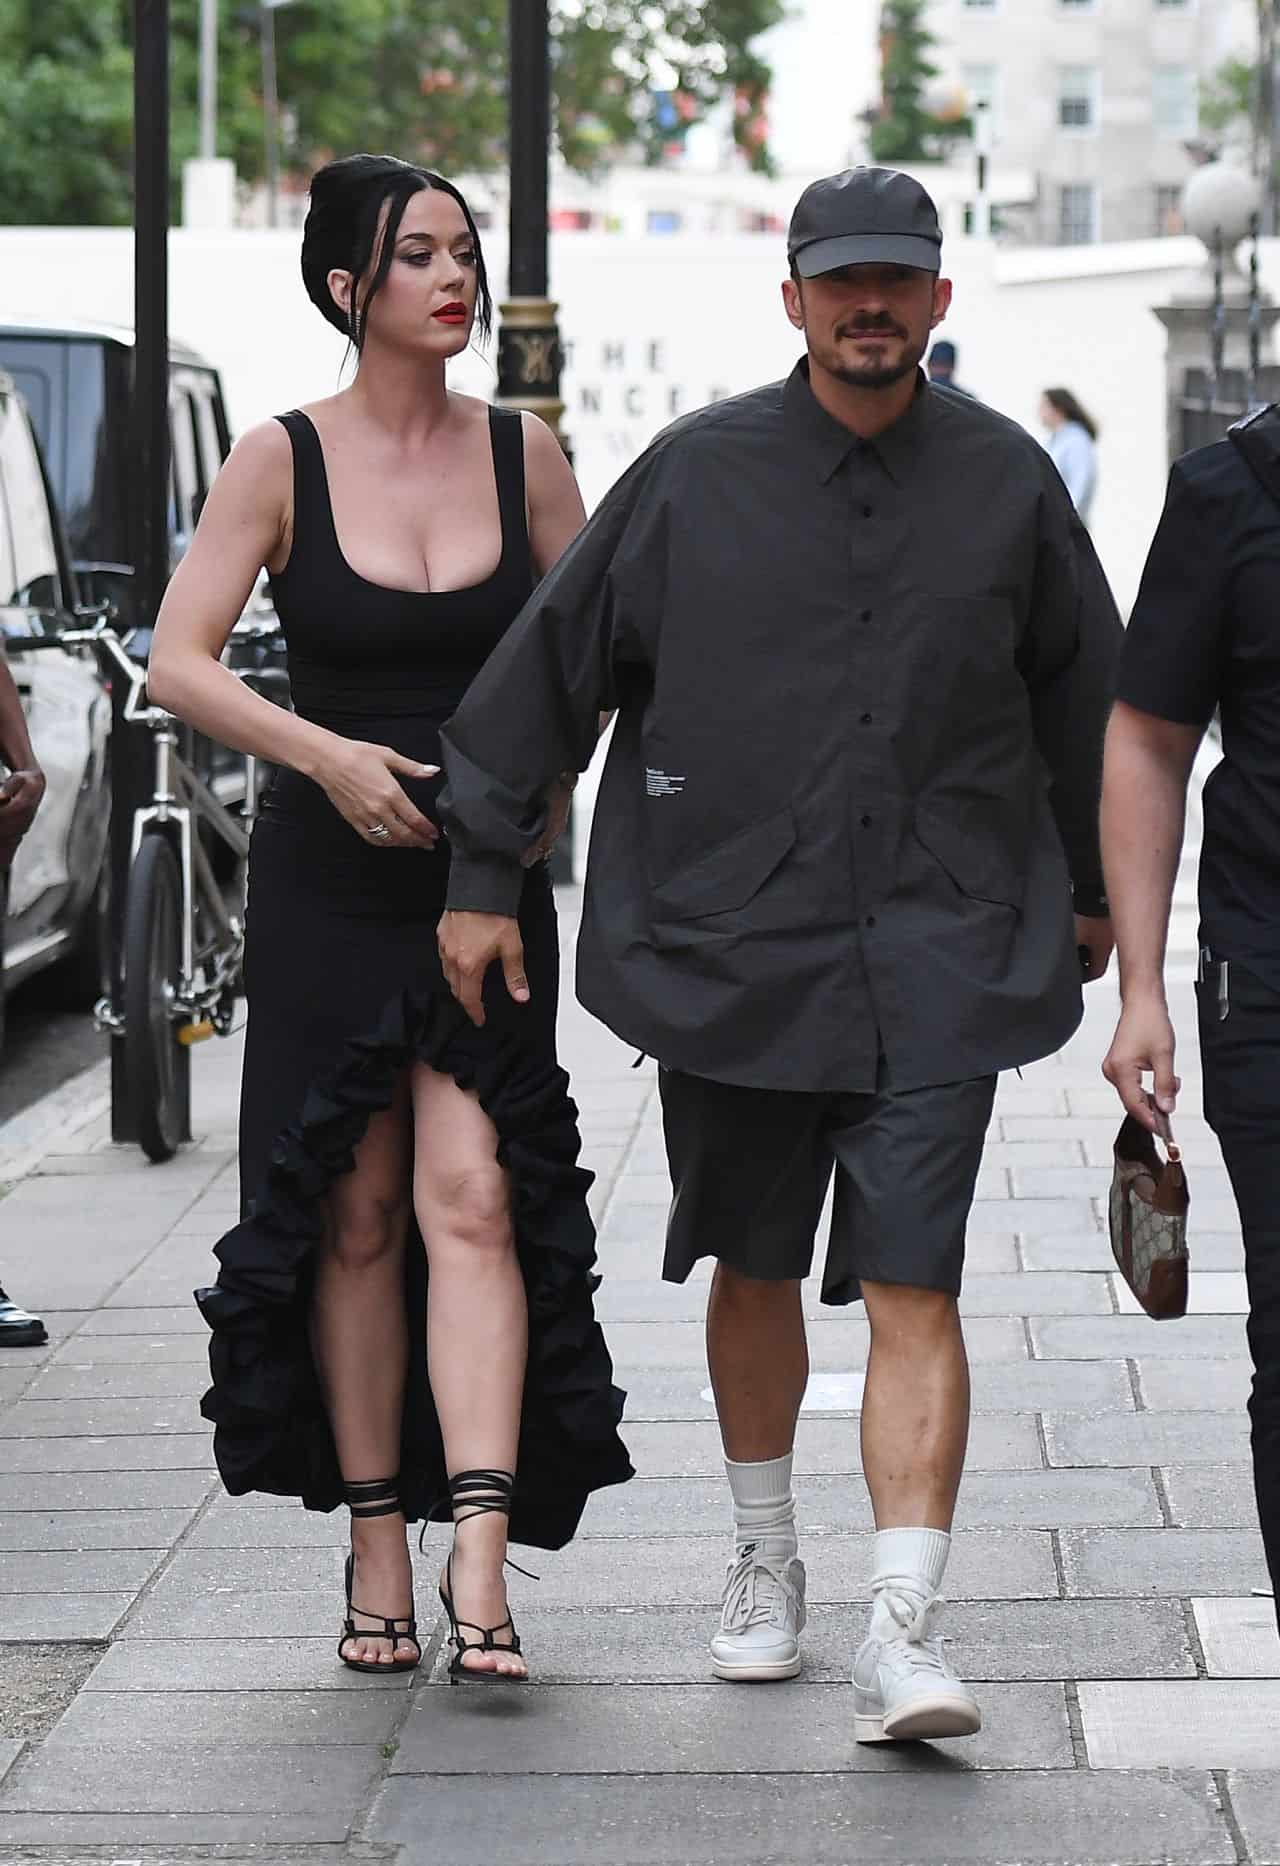 Katy Perry Steals the Show in Plunging Black Dress on Date Night in London